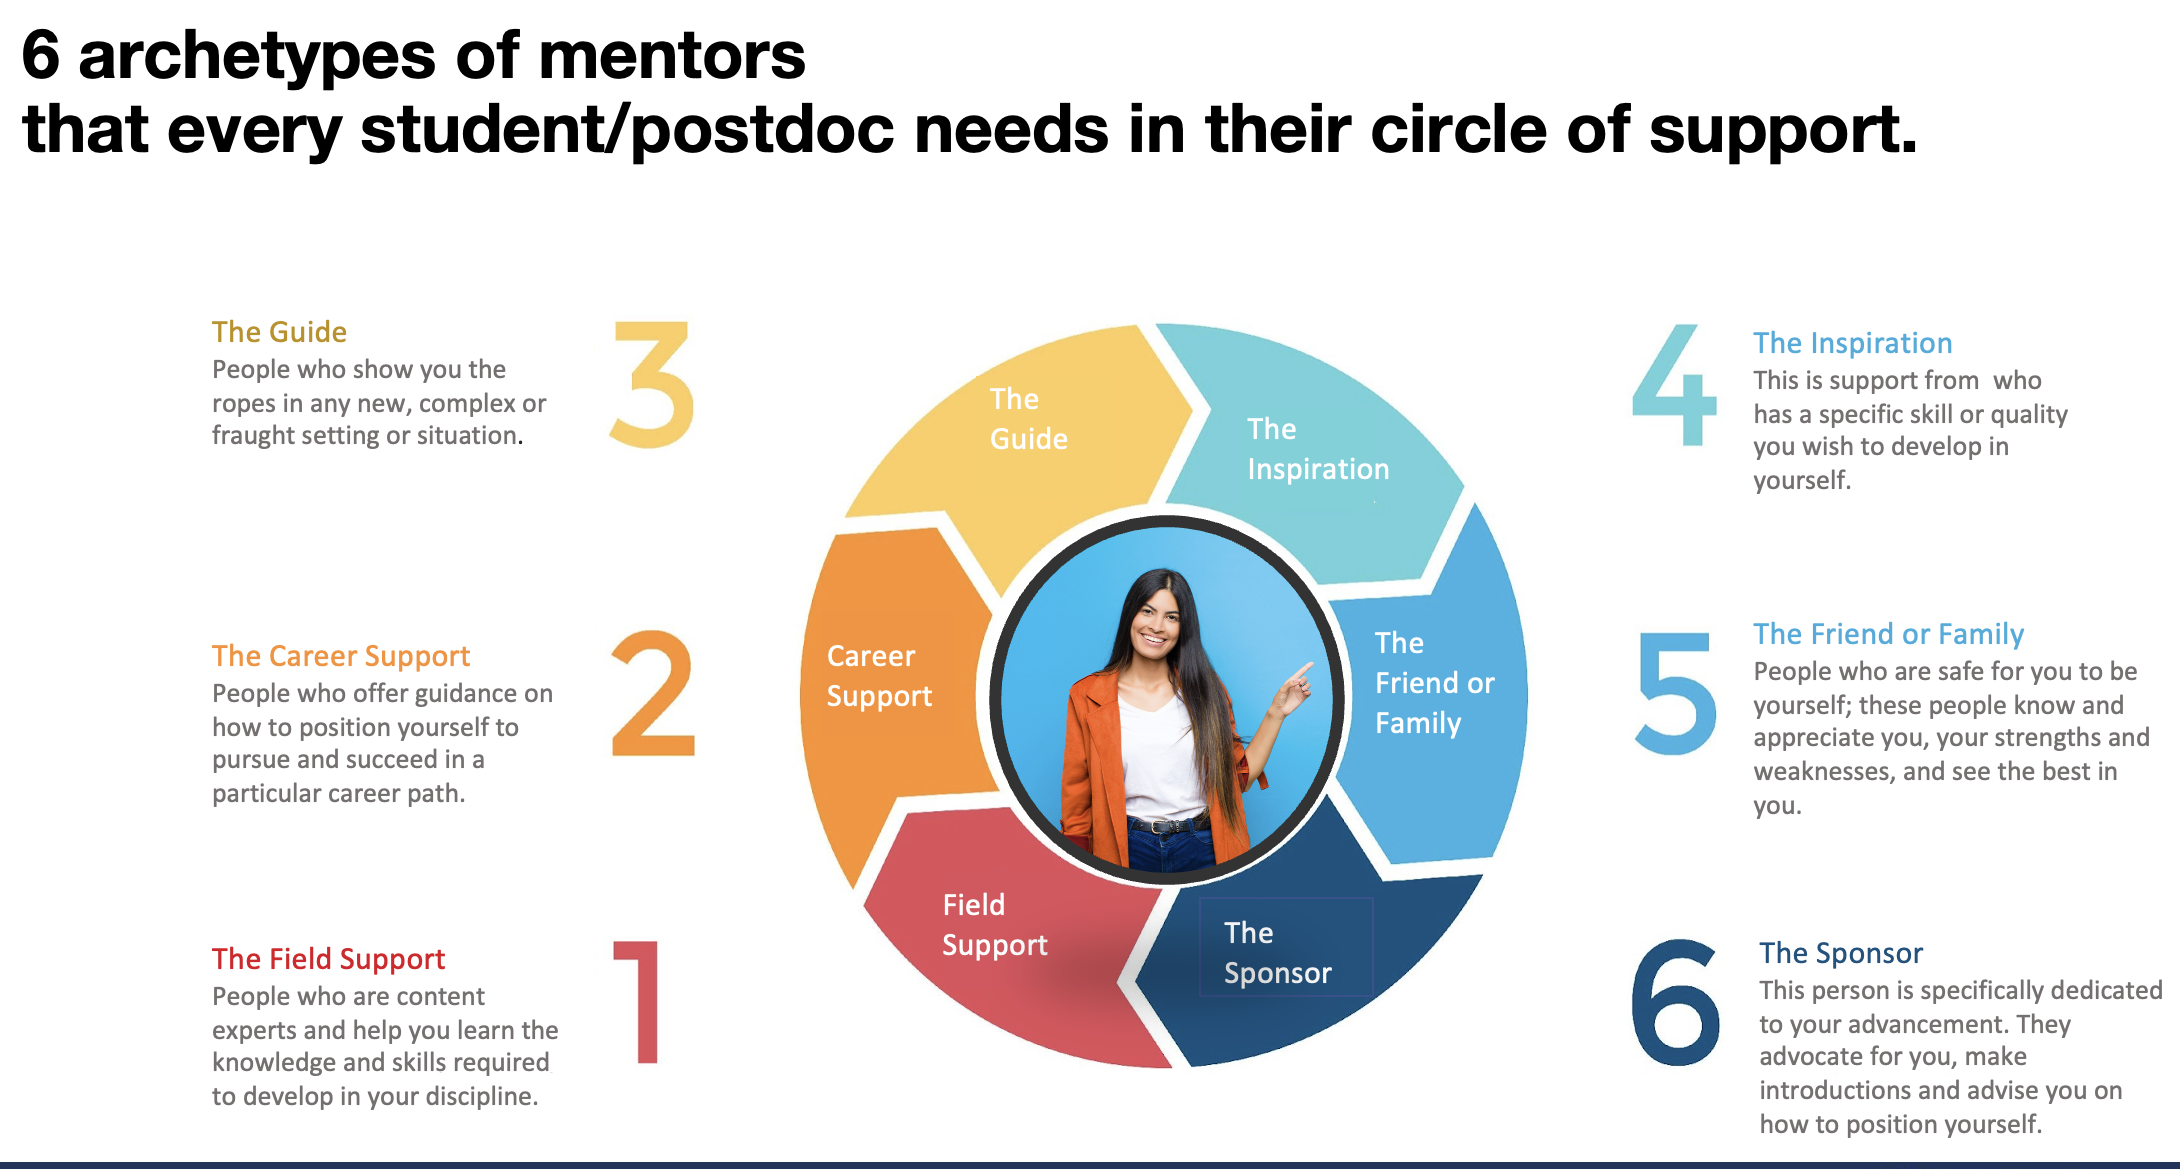 Image of a woman surrounded by a circle of 6 mentors